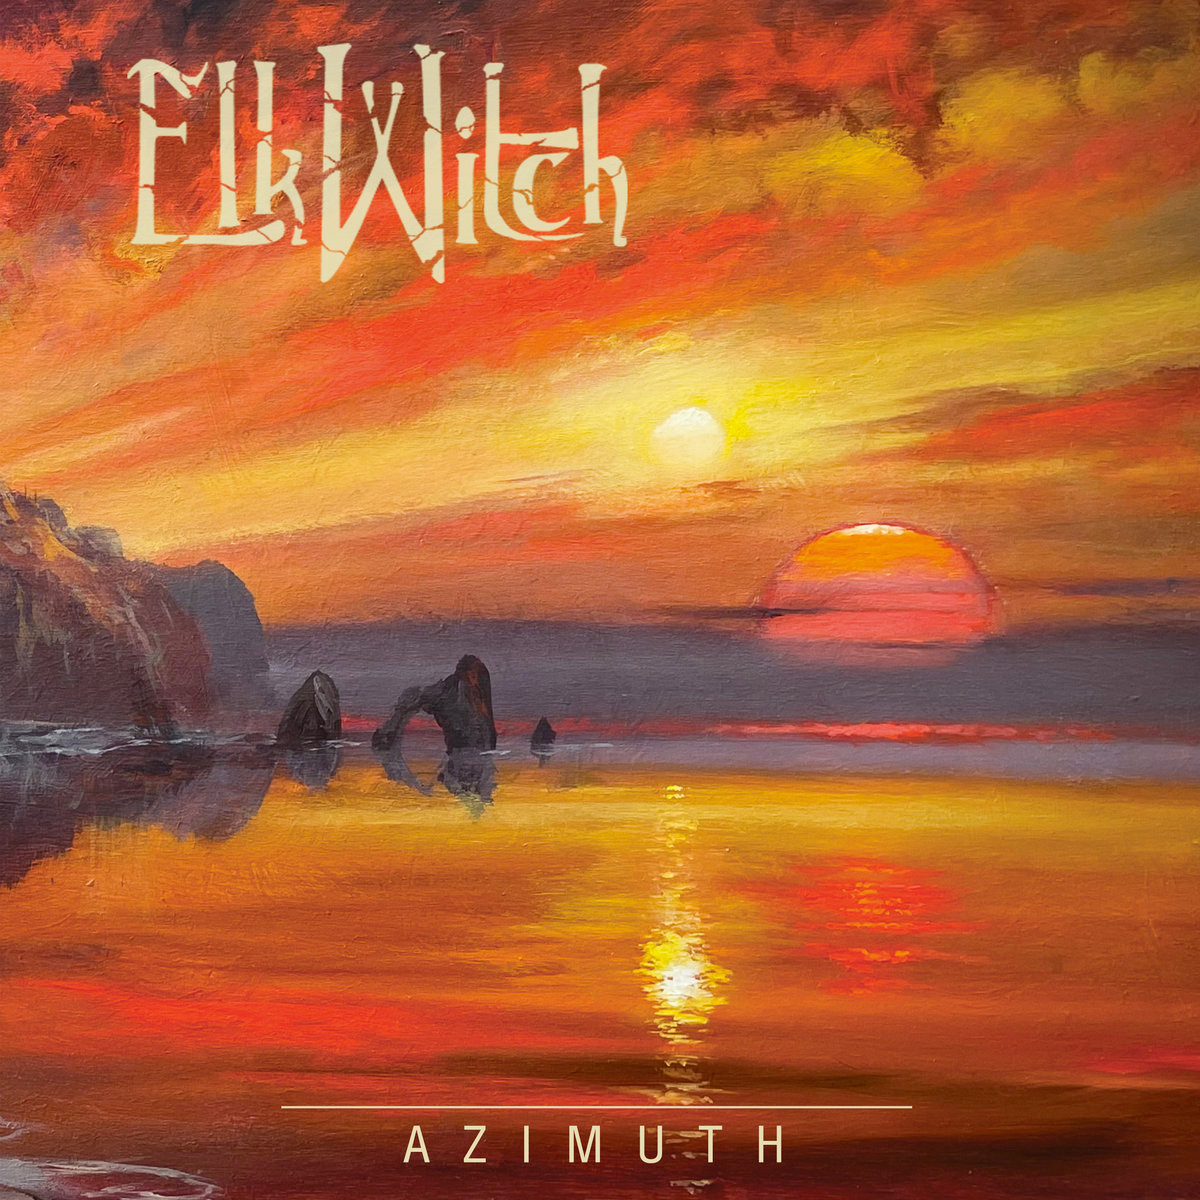 Azimuth by Elk Witch